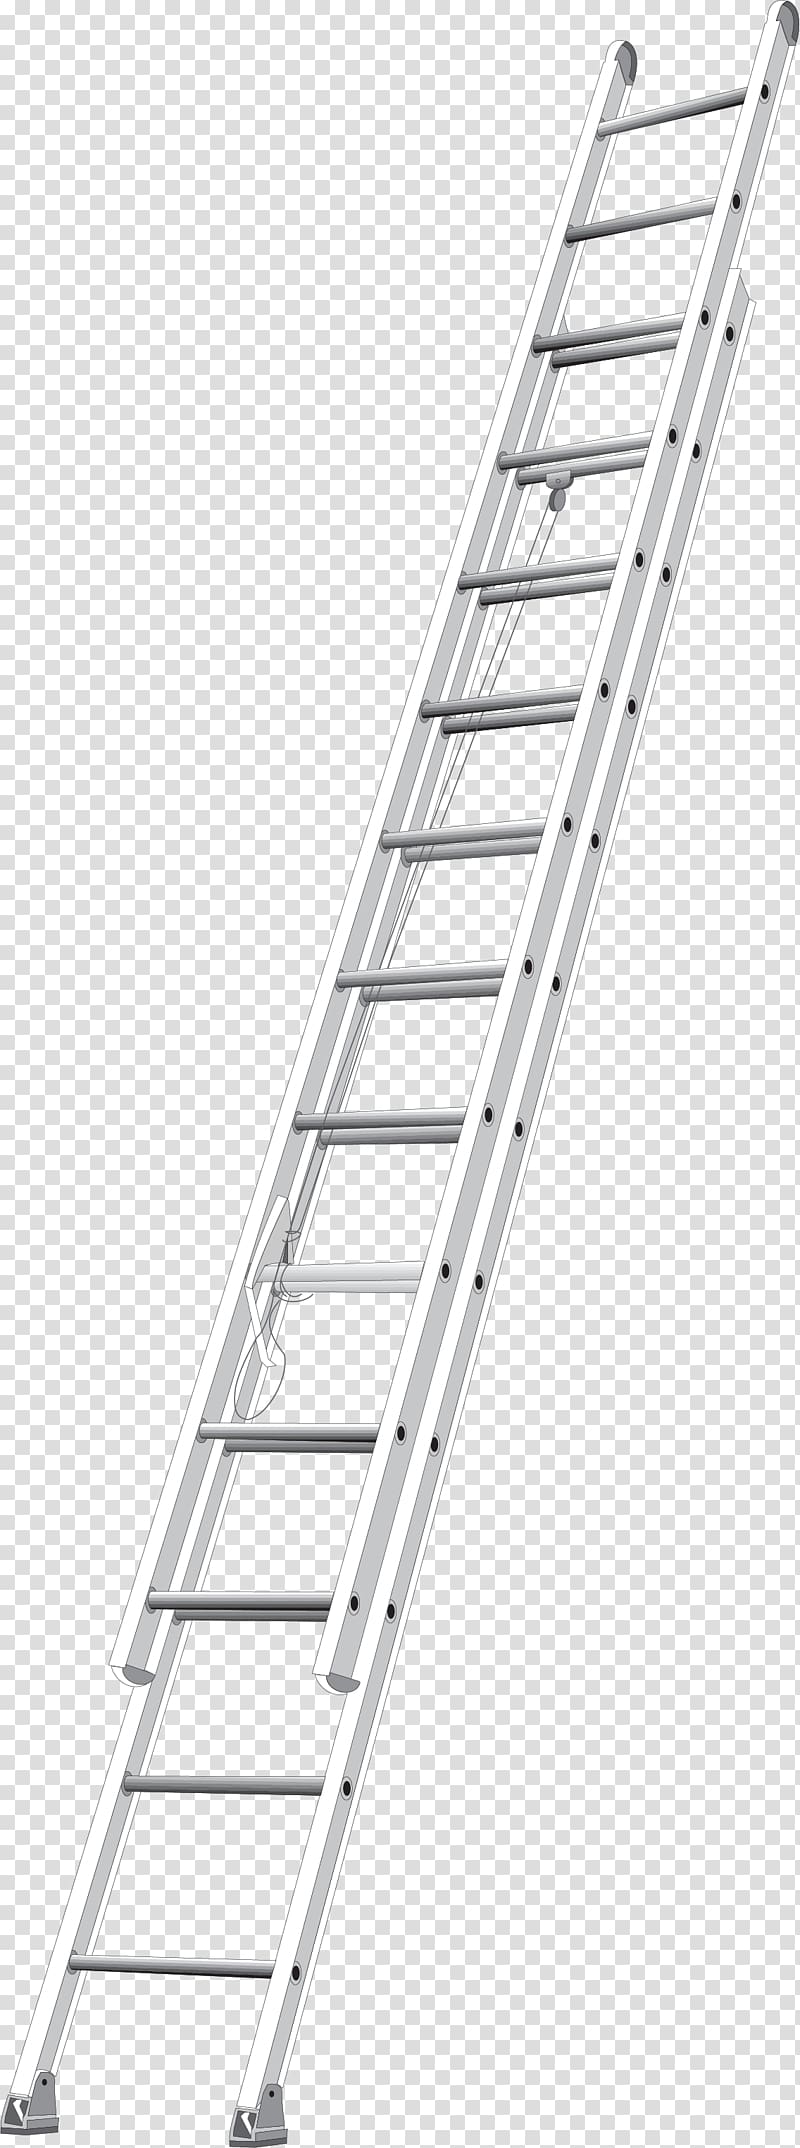 Ladder Stairs, Straight metal ladder transparent background PNG clipart